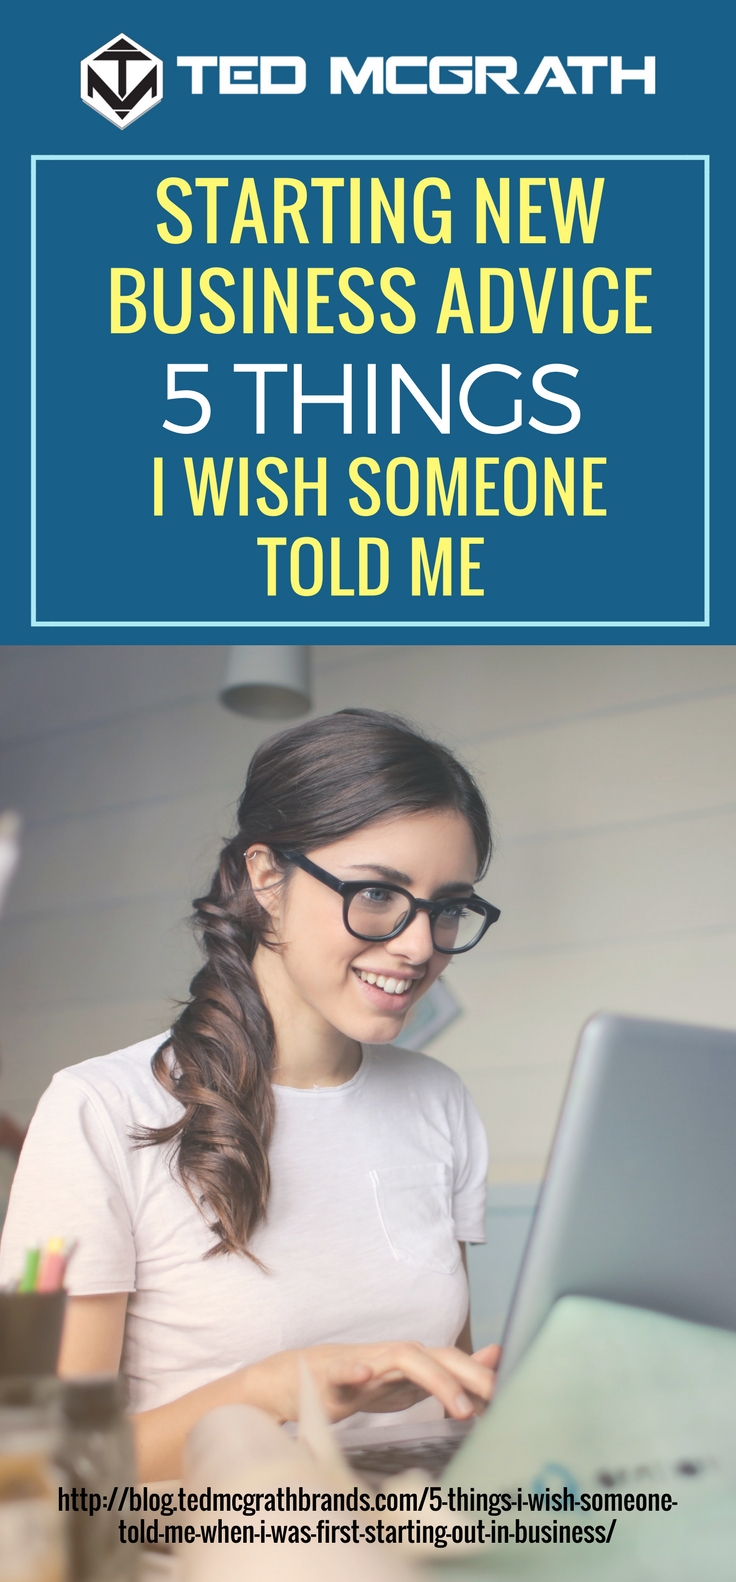 Starting New Business Advice | 5 Things I Wish Someone Told Me